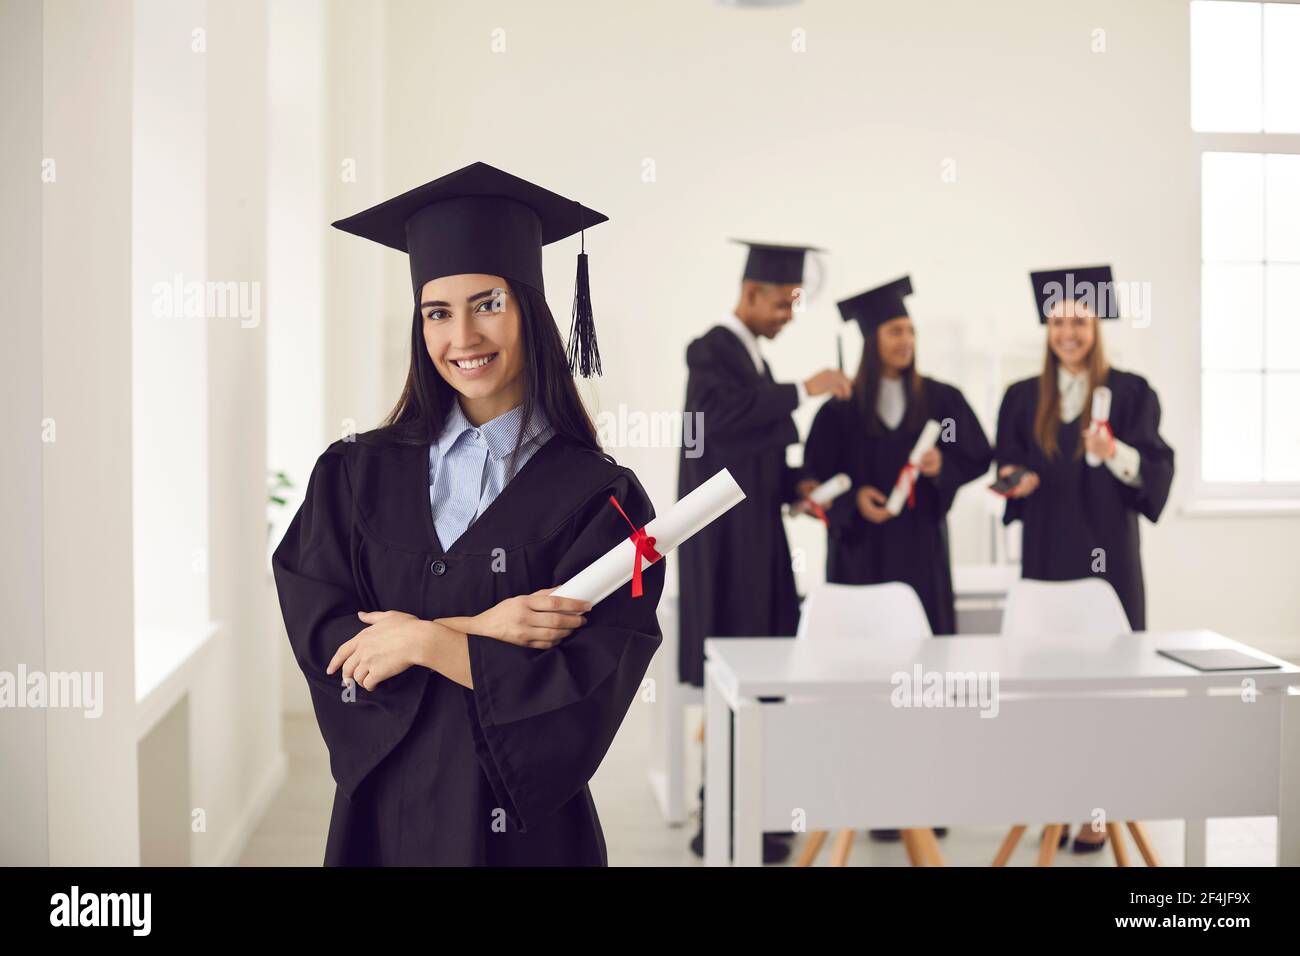 Pretty smiling caucasian girl student university graduate in mantle and bonet standing with diploma Stock Photo